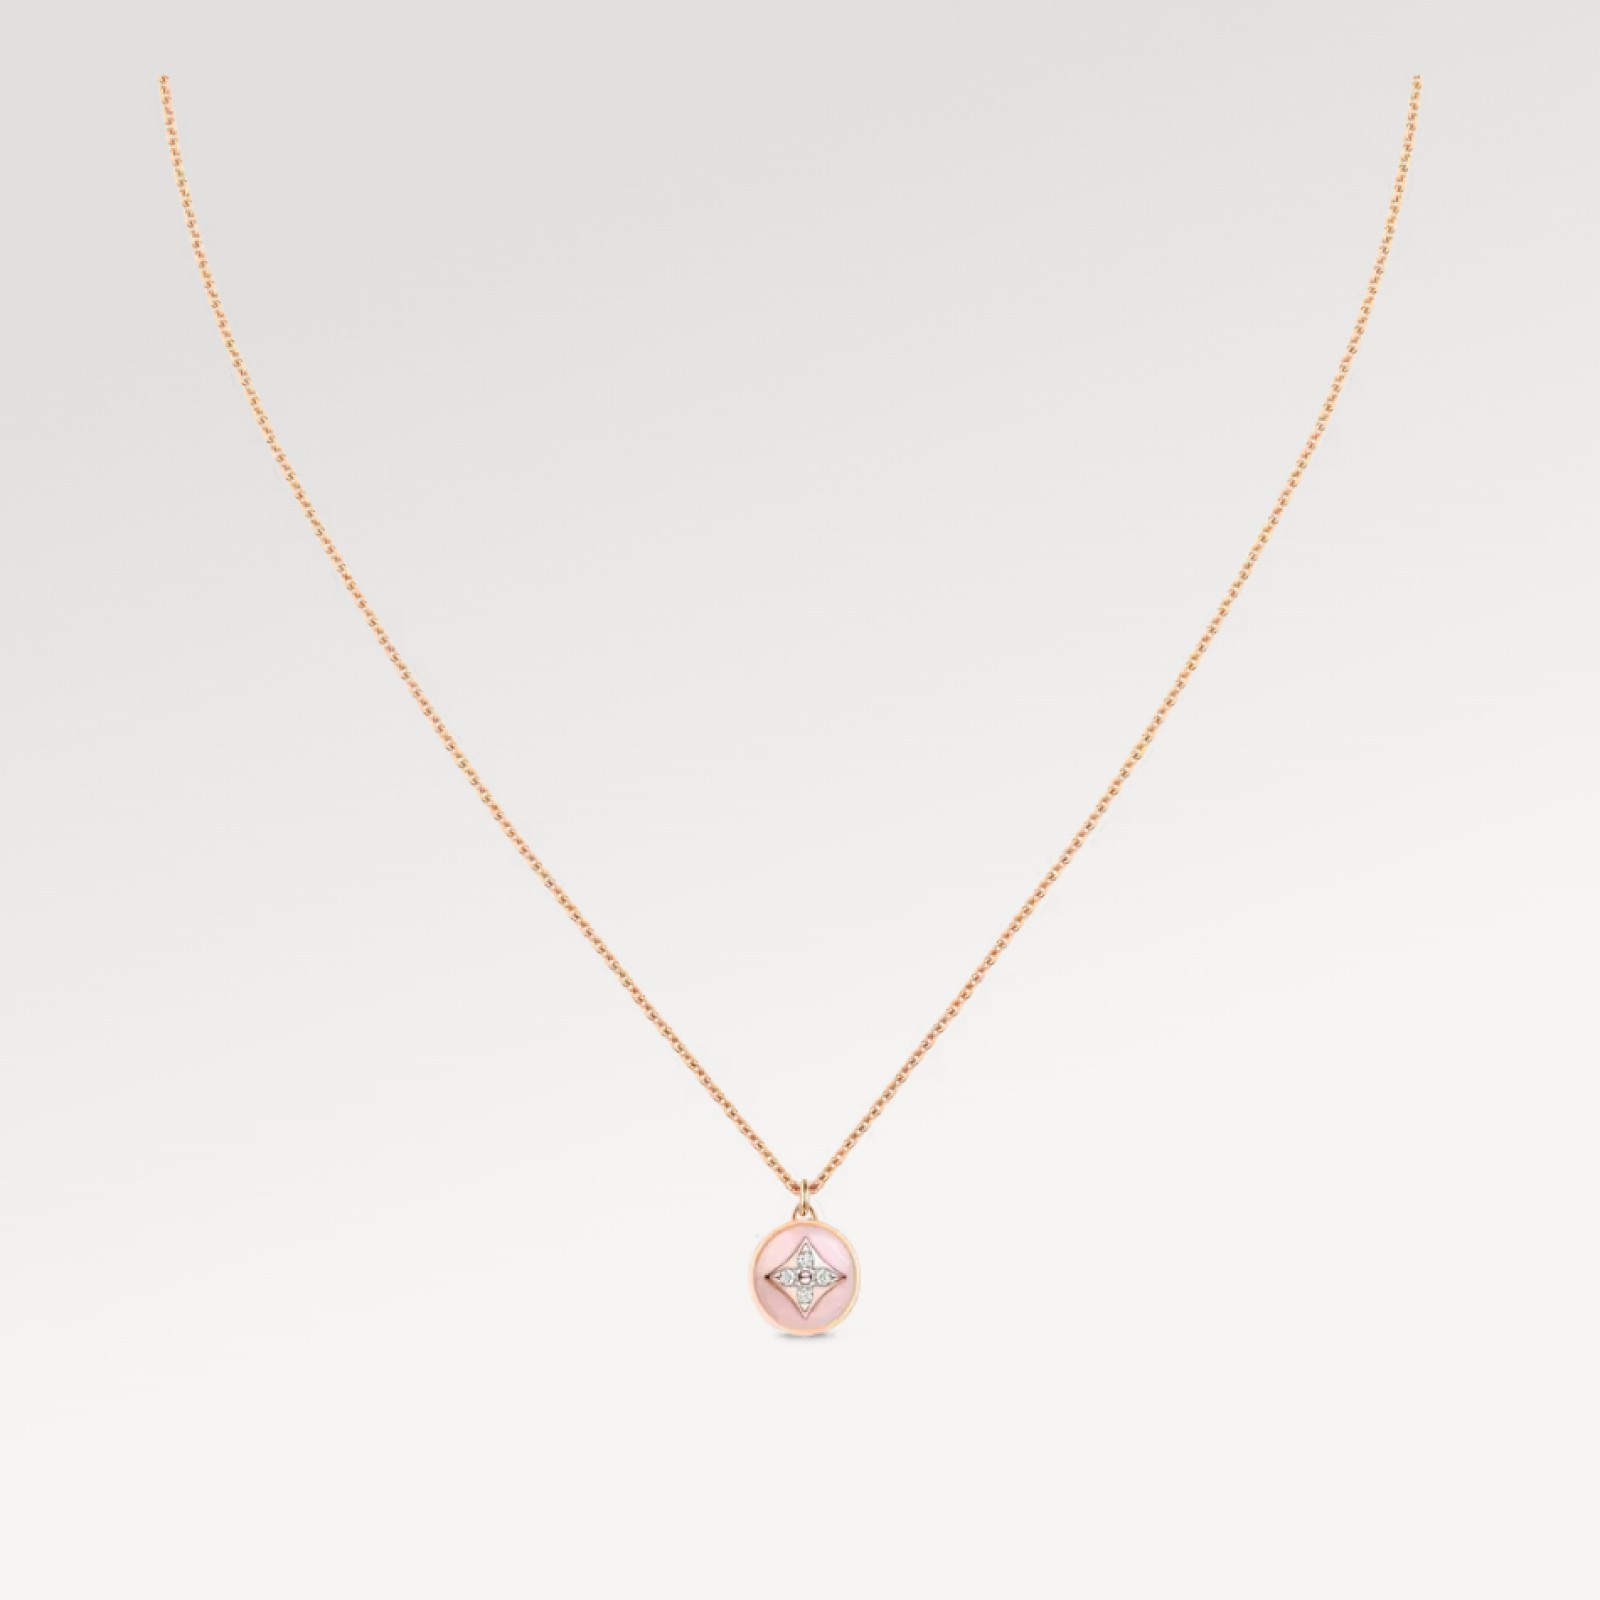 Color Blossom Pendant, Pink Gold, White Gold, Pink Opal And Diamonds